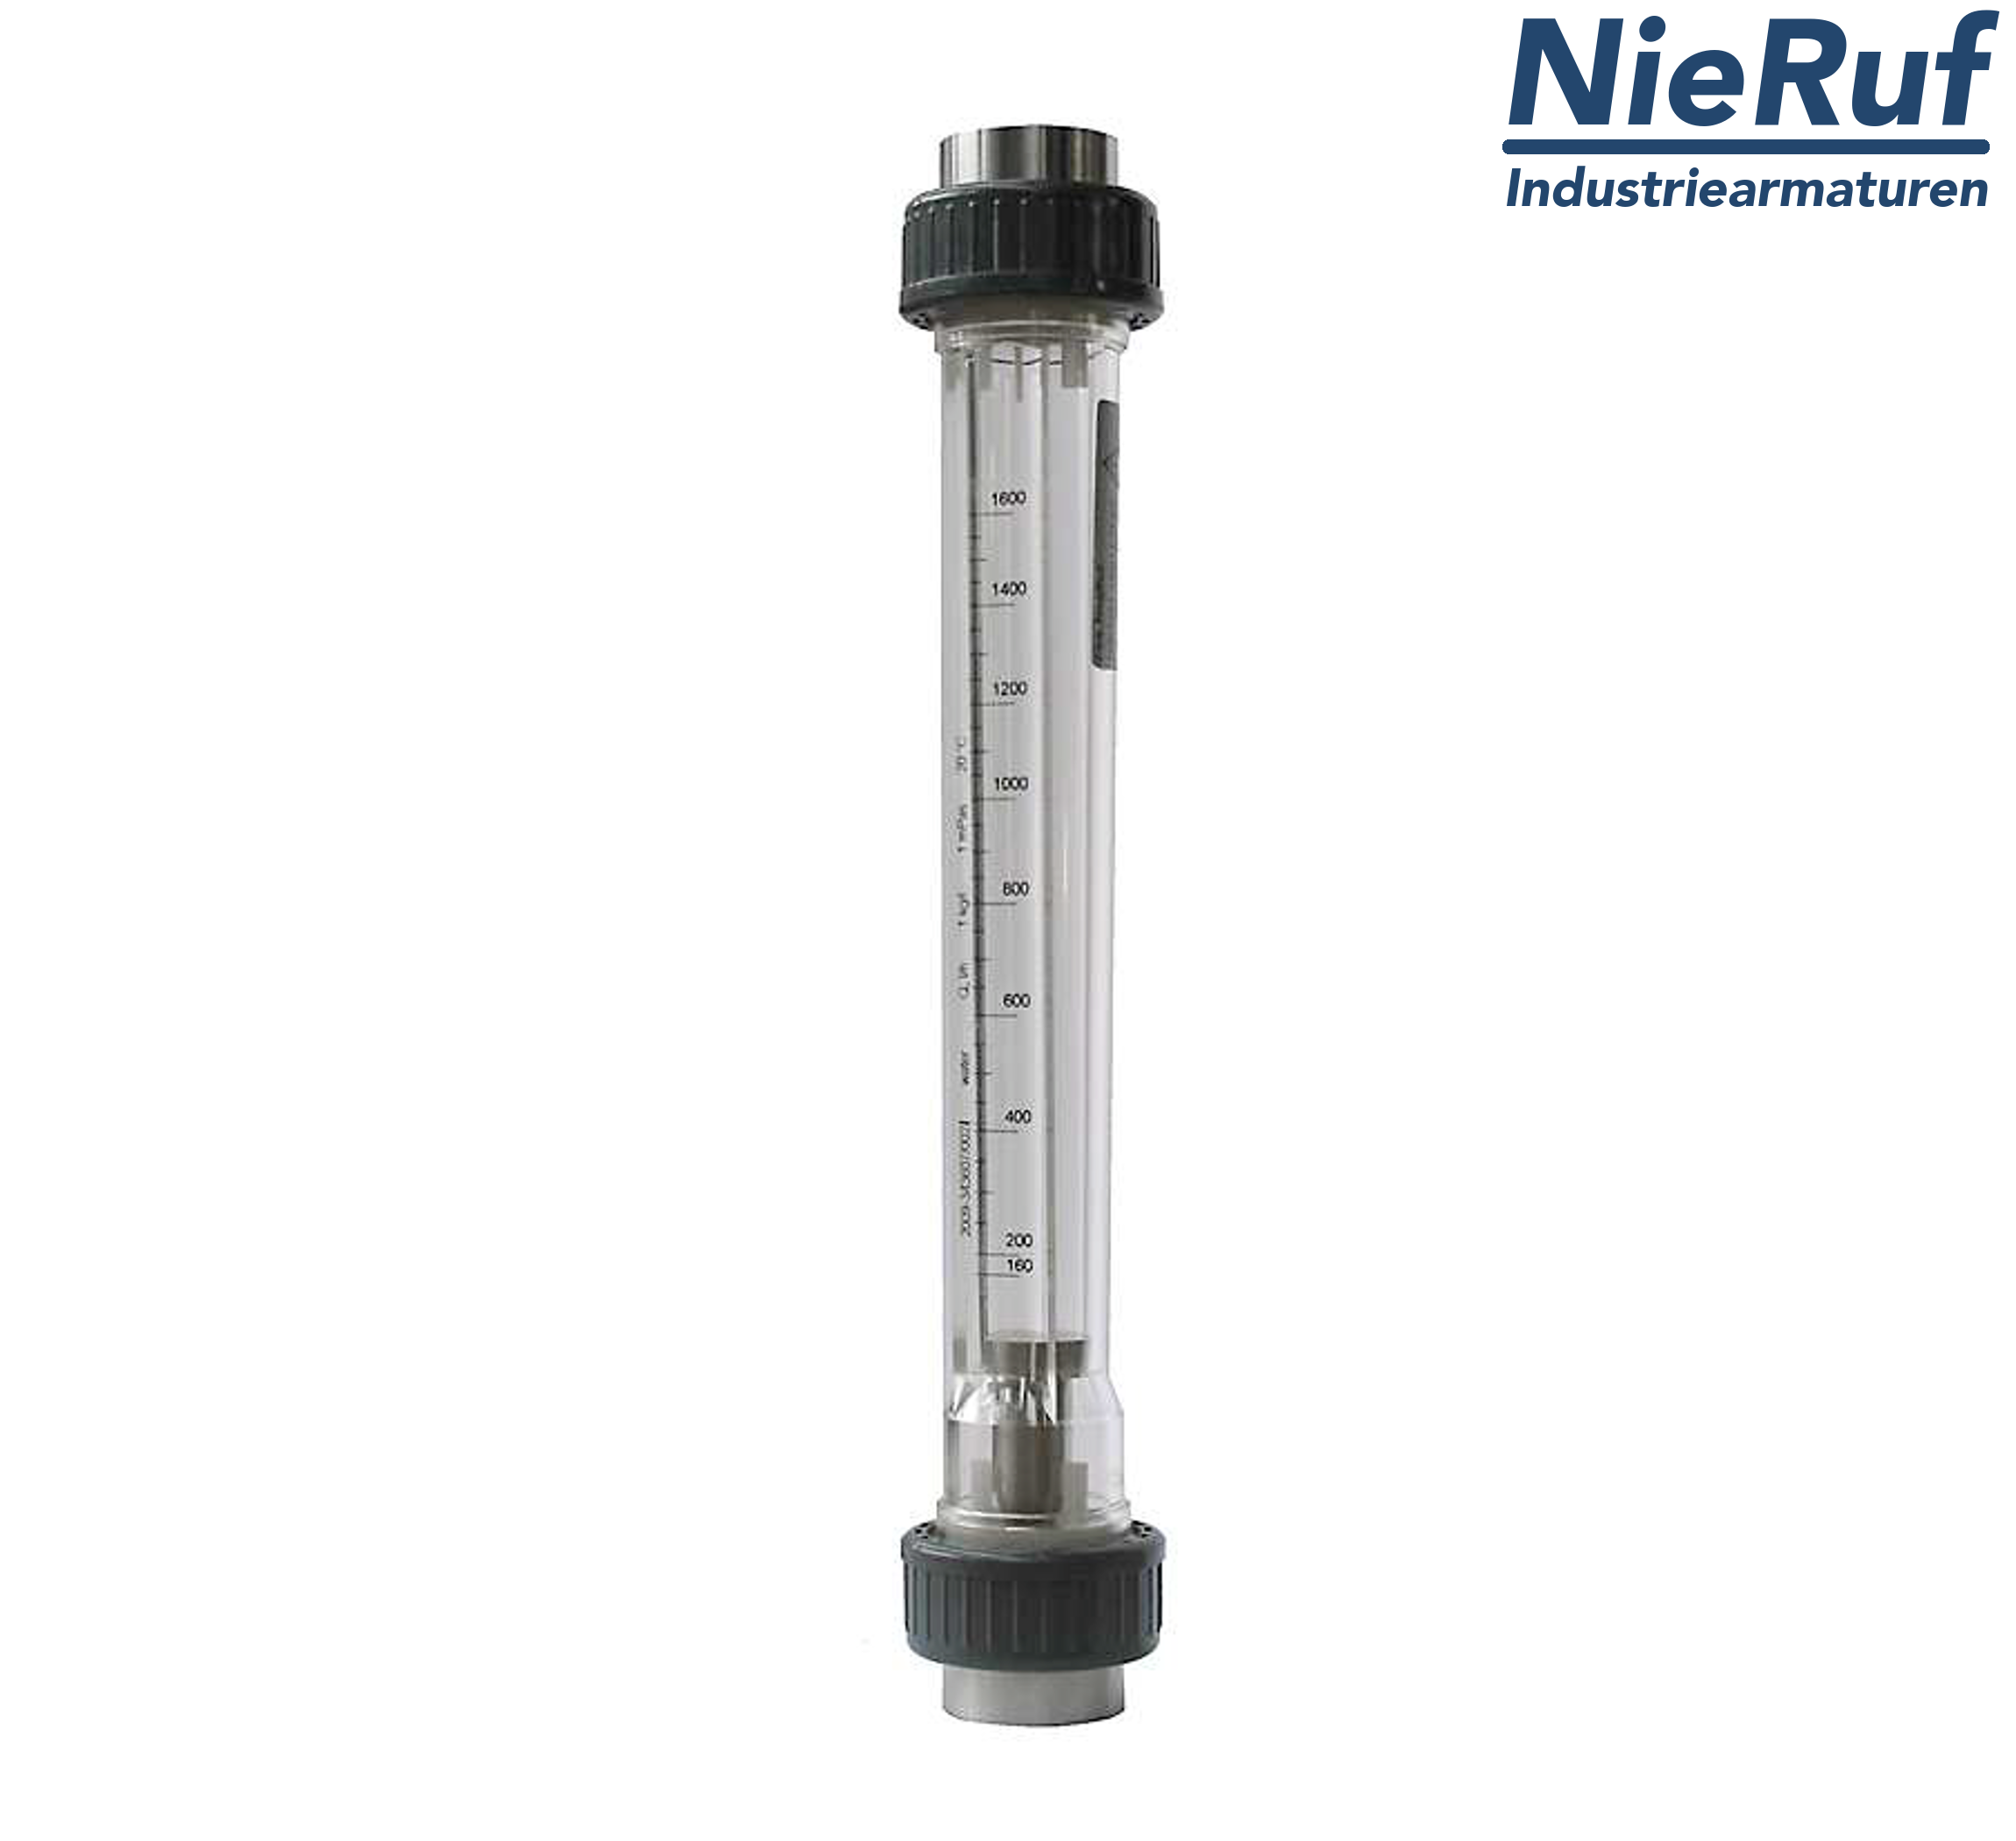 Variable area flowmeter 2" inch 400.0 - 4000 l/h water NBR